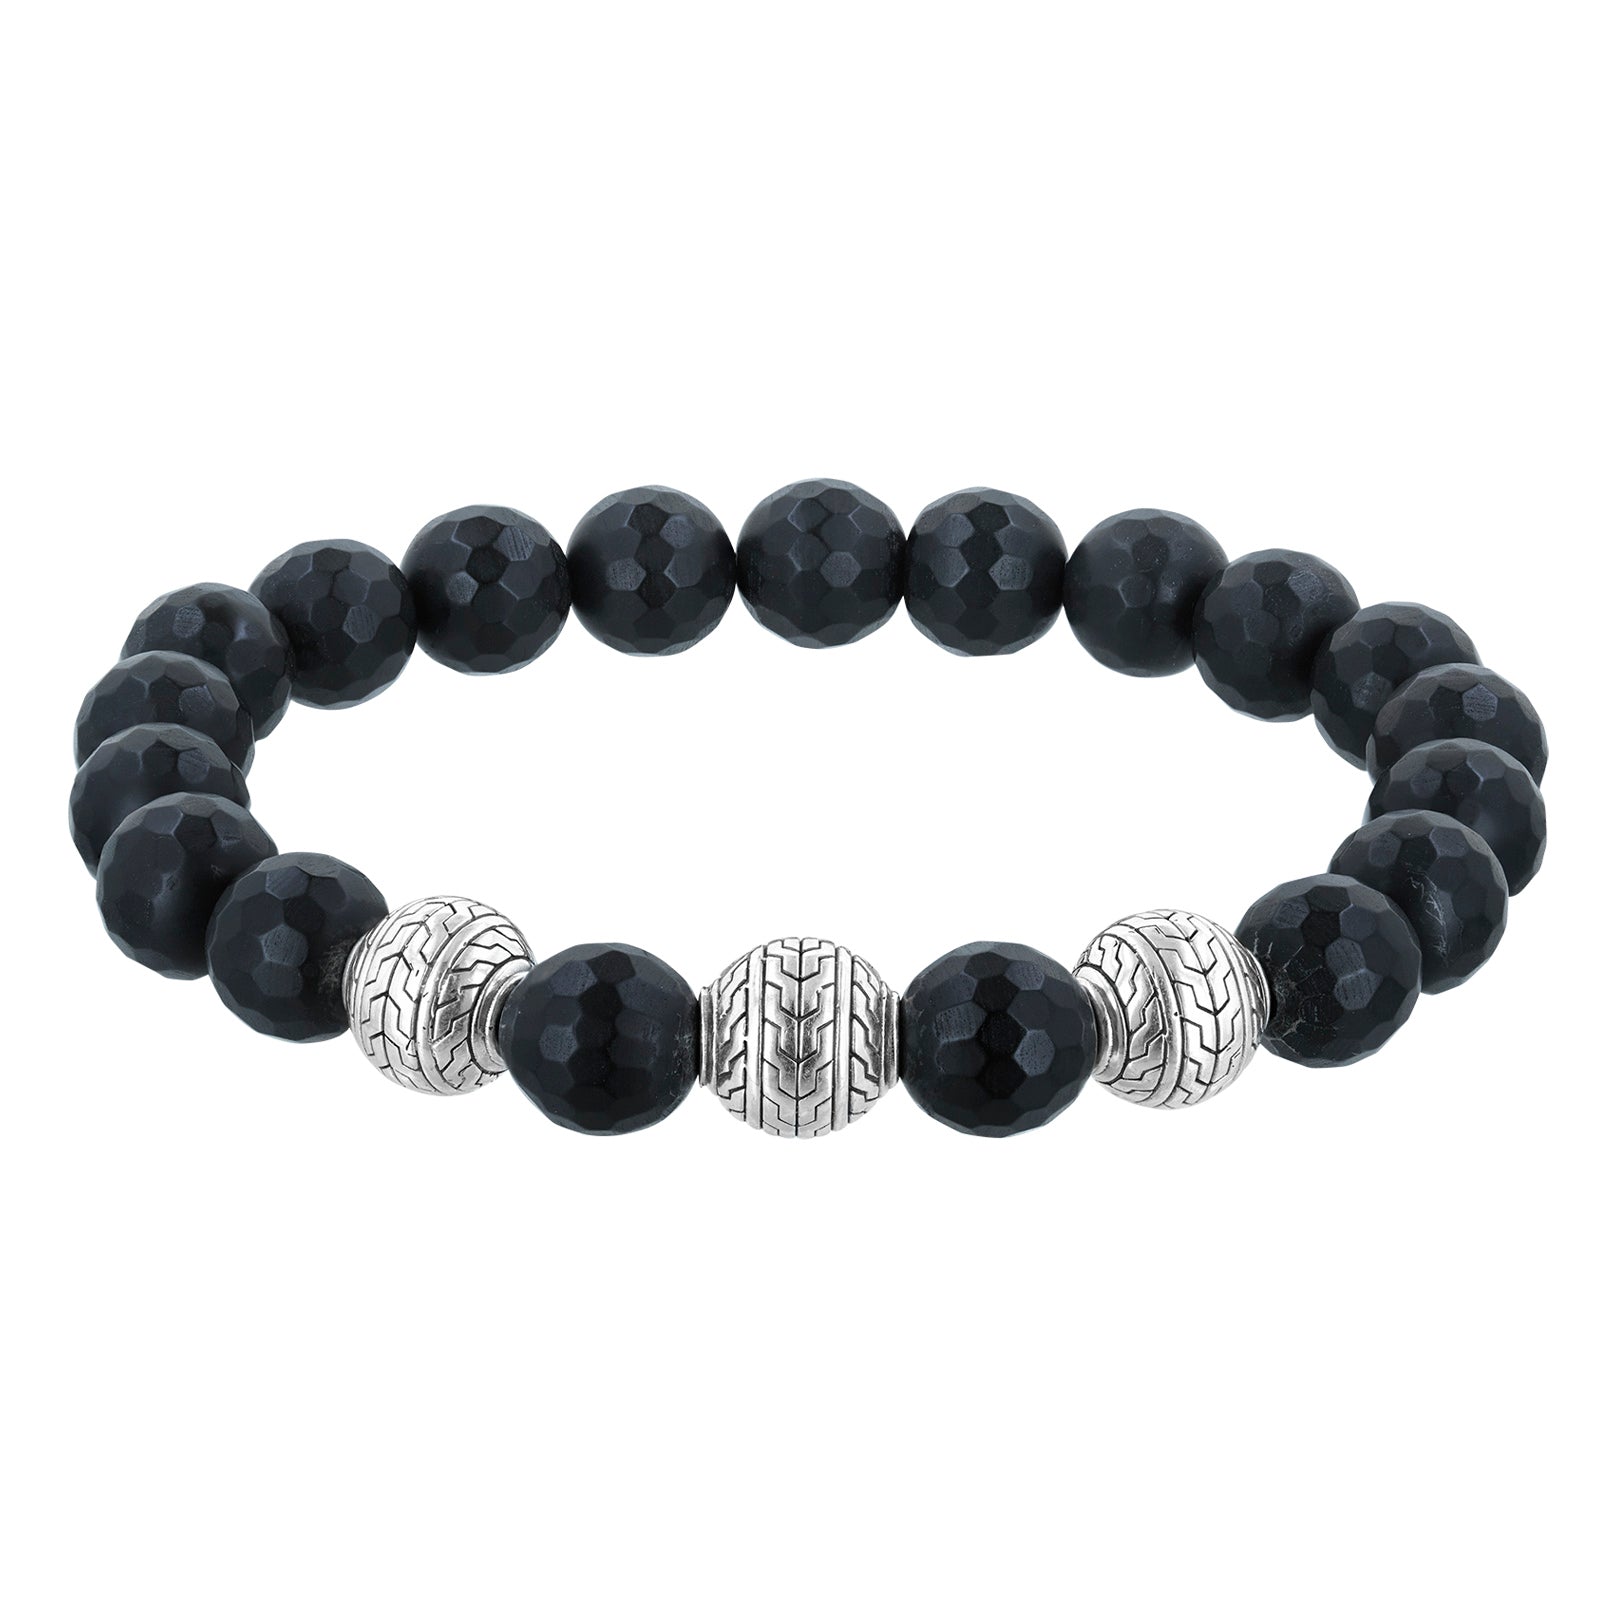 Bali Men's Faceted Frosted Black Onyx and Sterling Silver Beads Stretch Bracelet